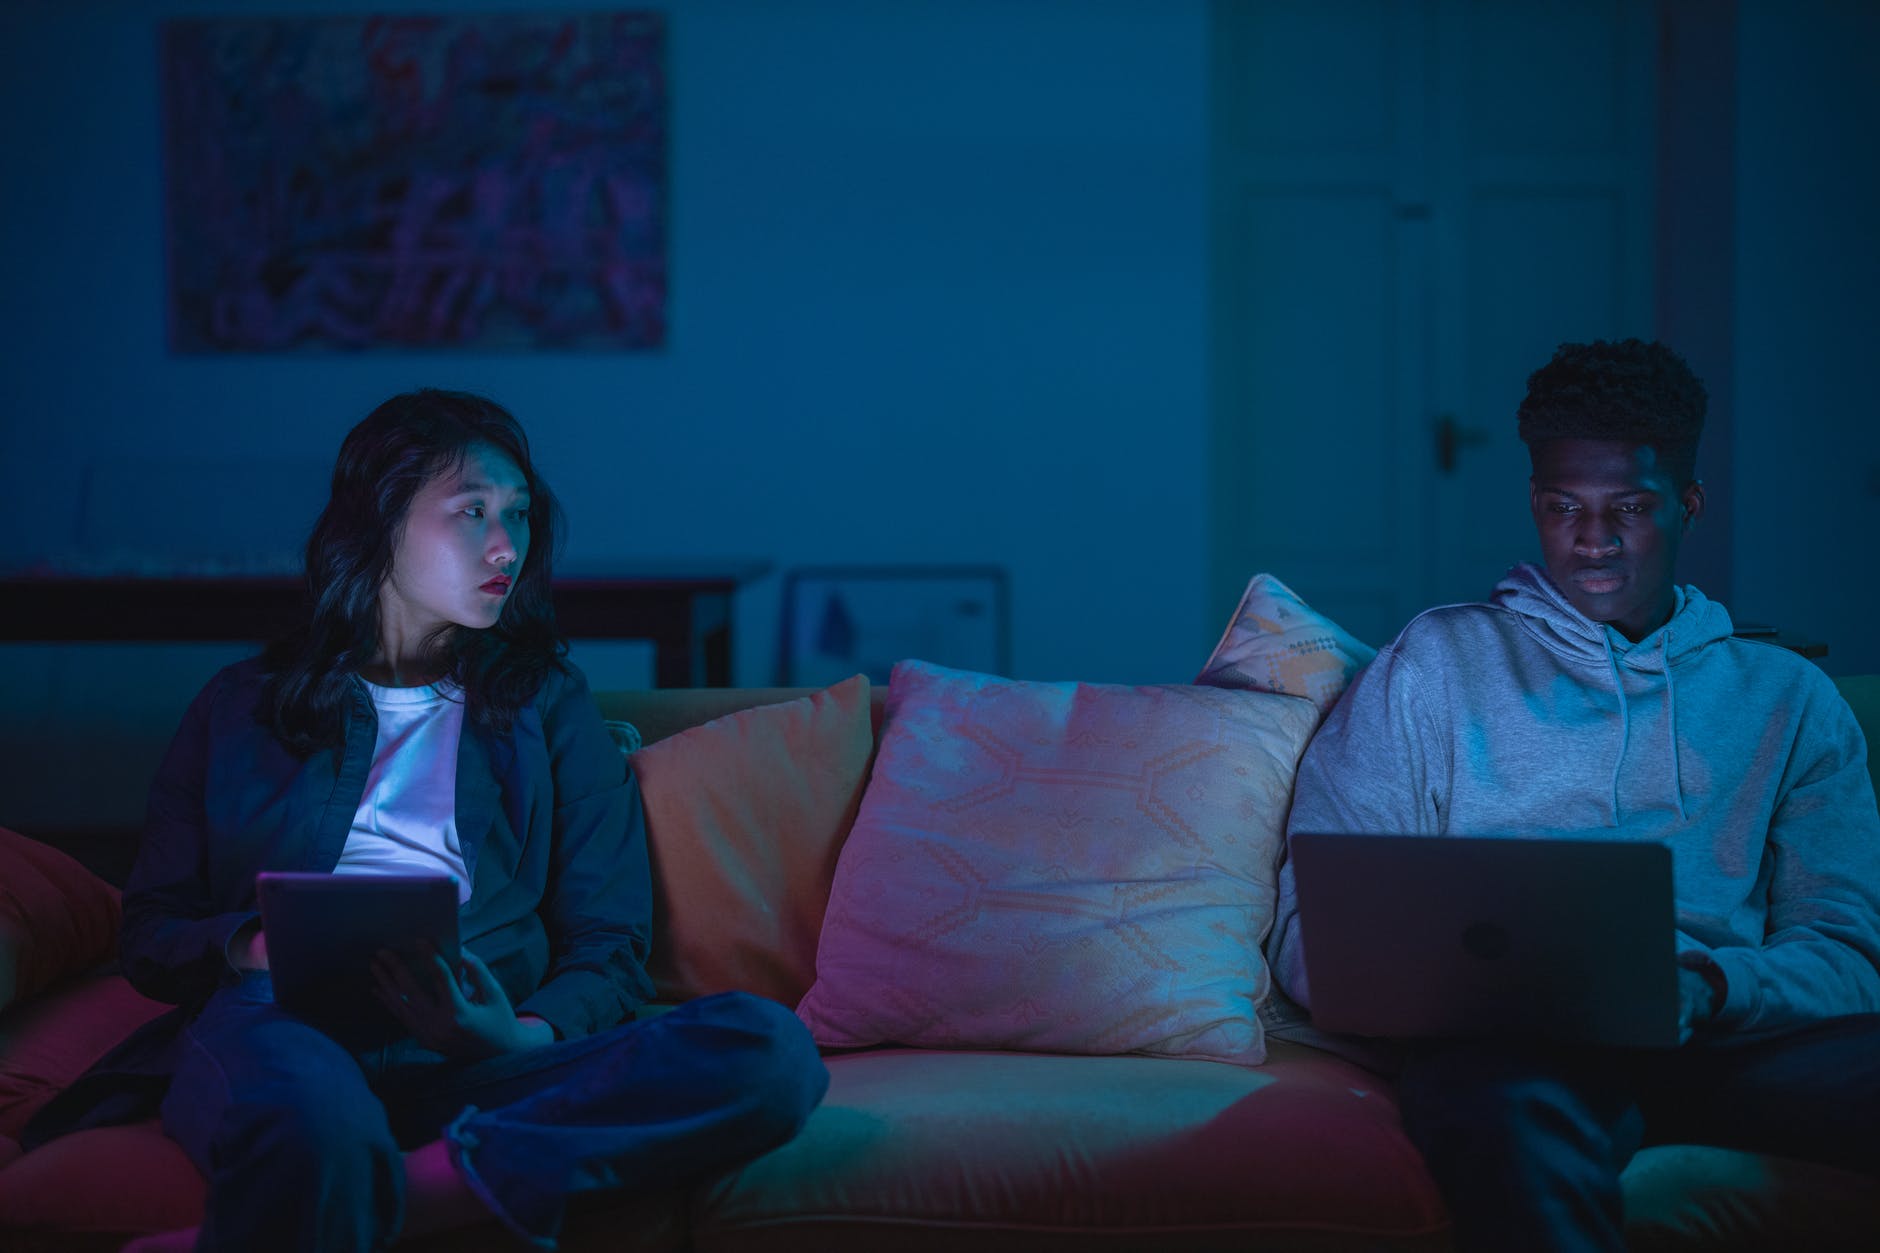 A couple is sitting on a couch, holding different devices. The long-haired womxn on the right is staring at her partner, with a concerned look on their face. Their partner is oblivious, looking at the screen of their computer.